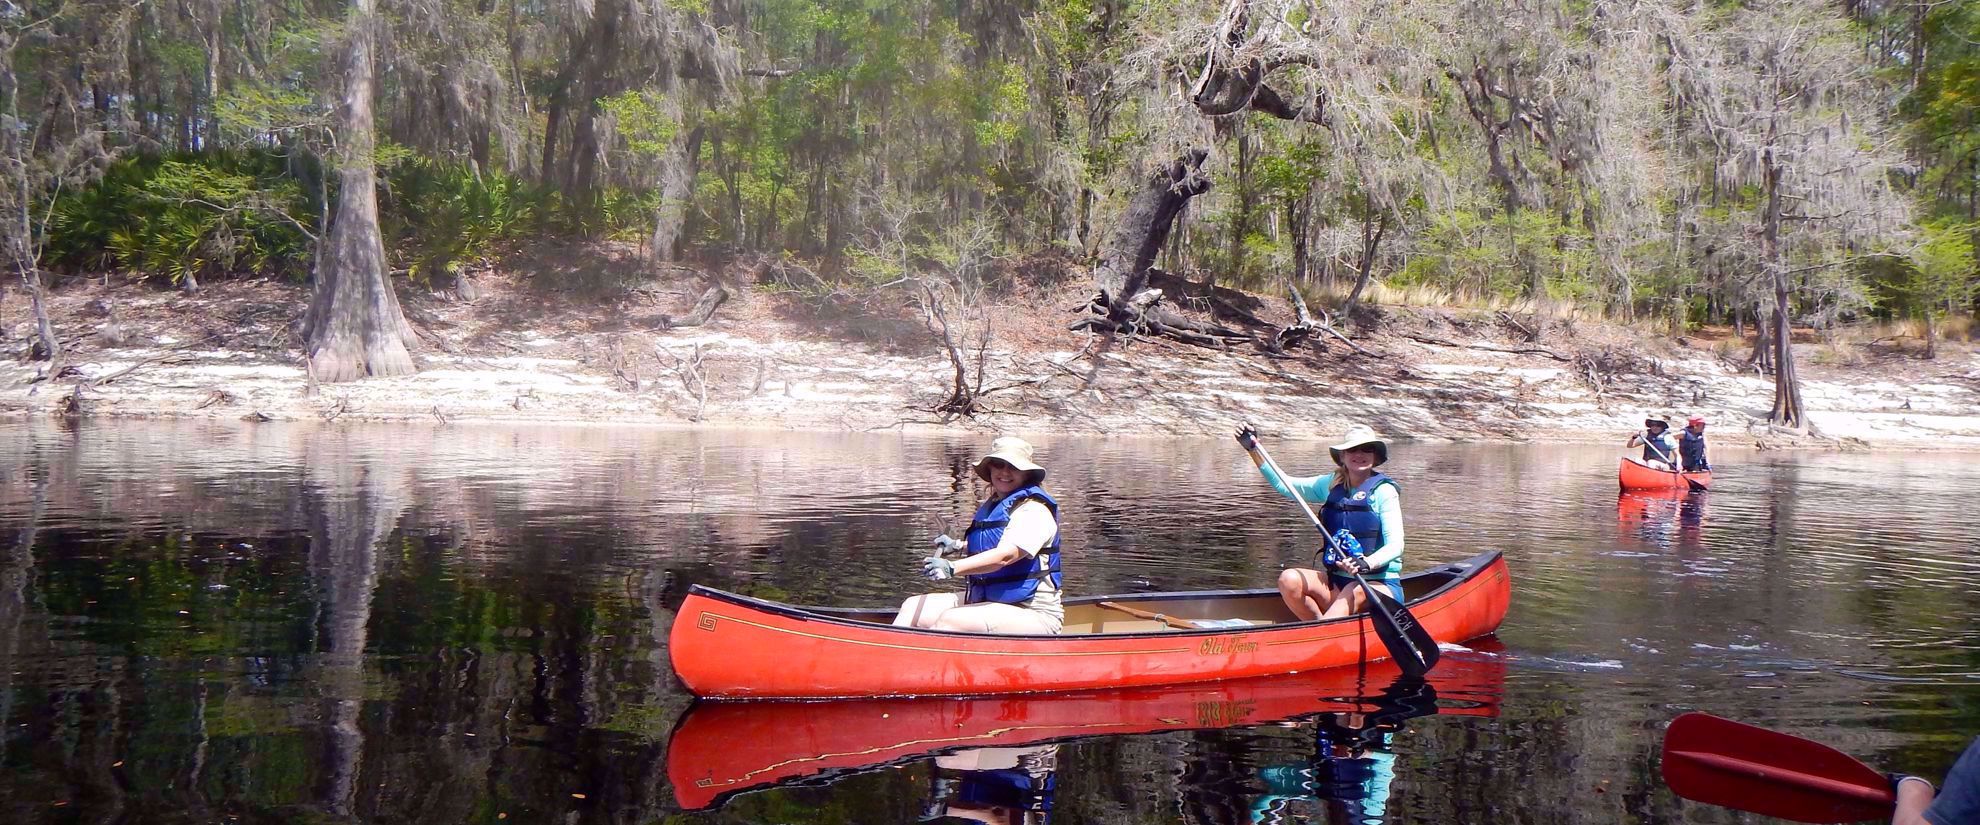 kayaking suwannee river with adventure travel group